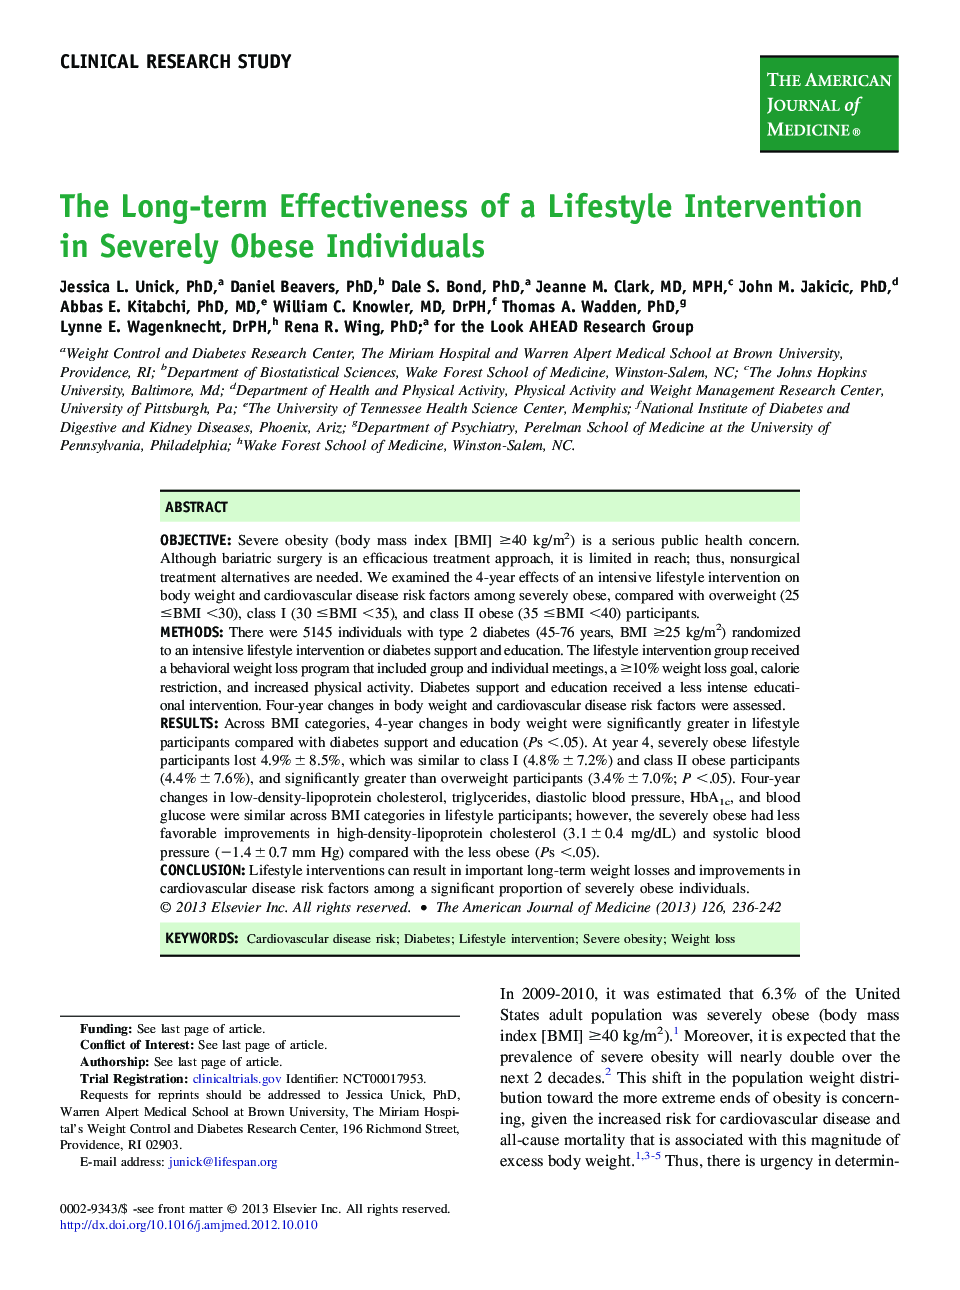 The Long-term Effectiveness of a Lifestyle Intervention in Severely Obese Individuals